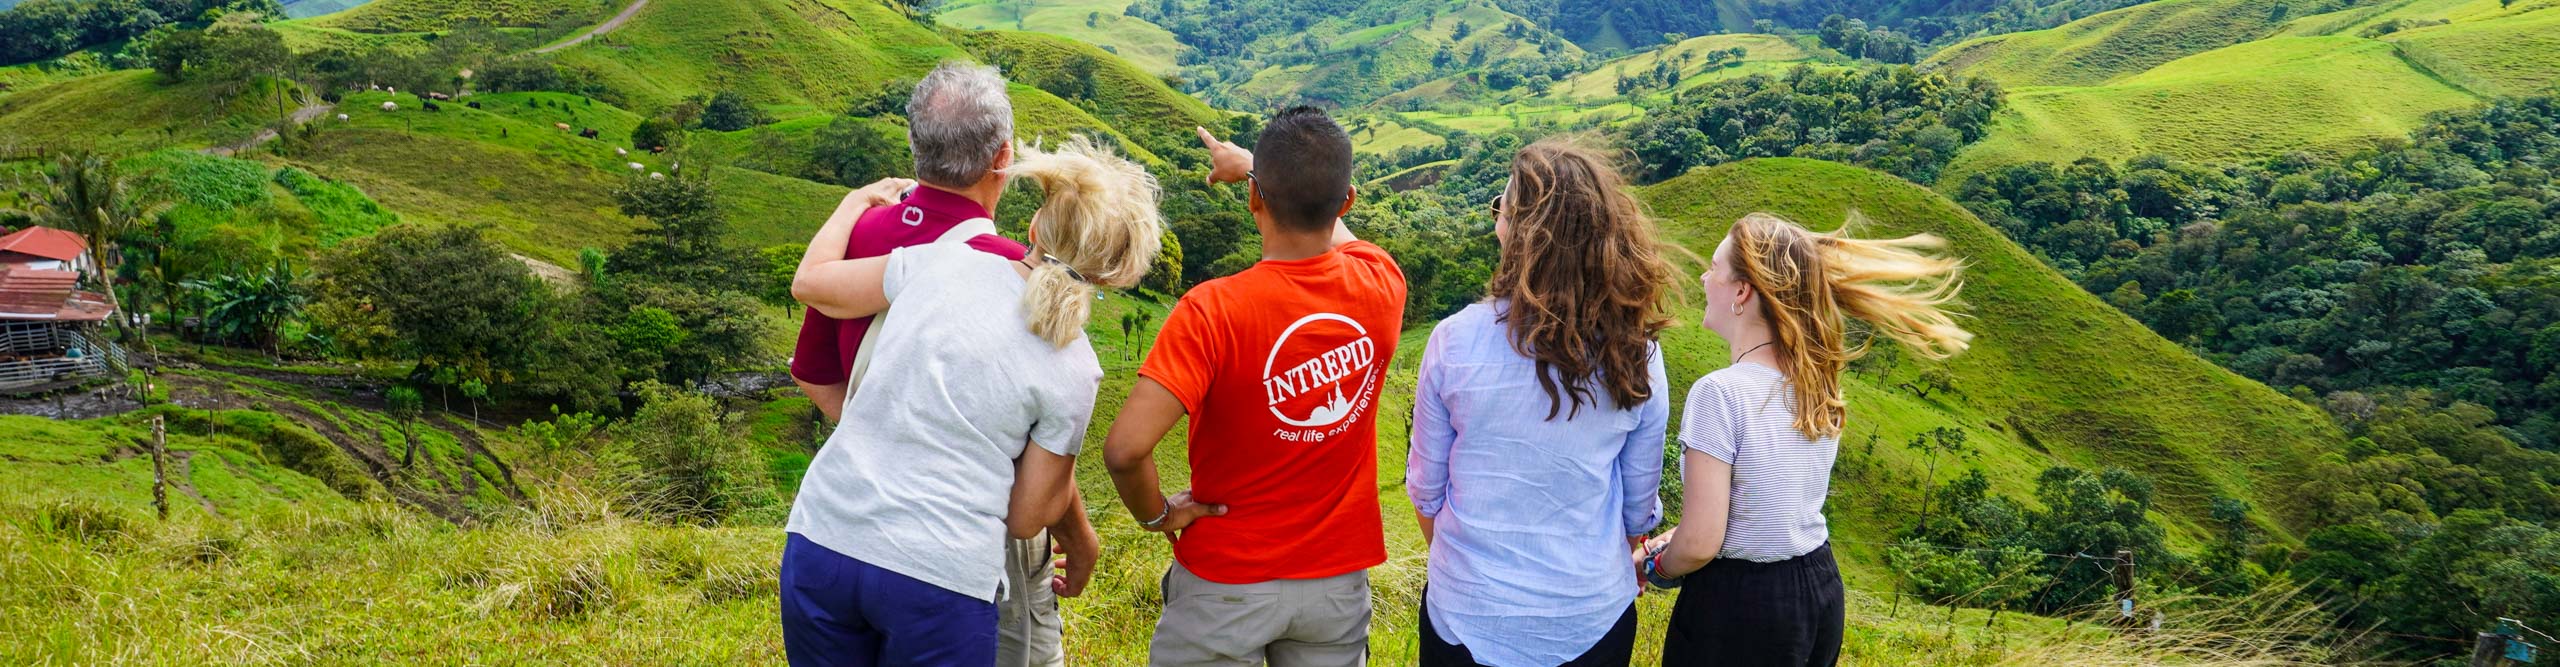 Group looking out over hills with they guide point at something of interest, Costa Rica 